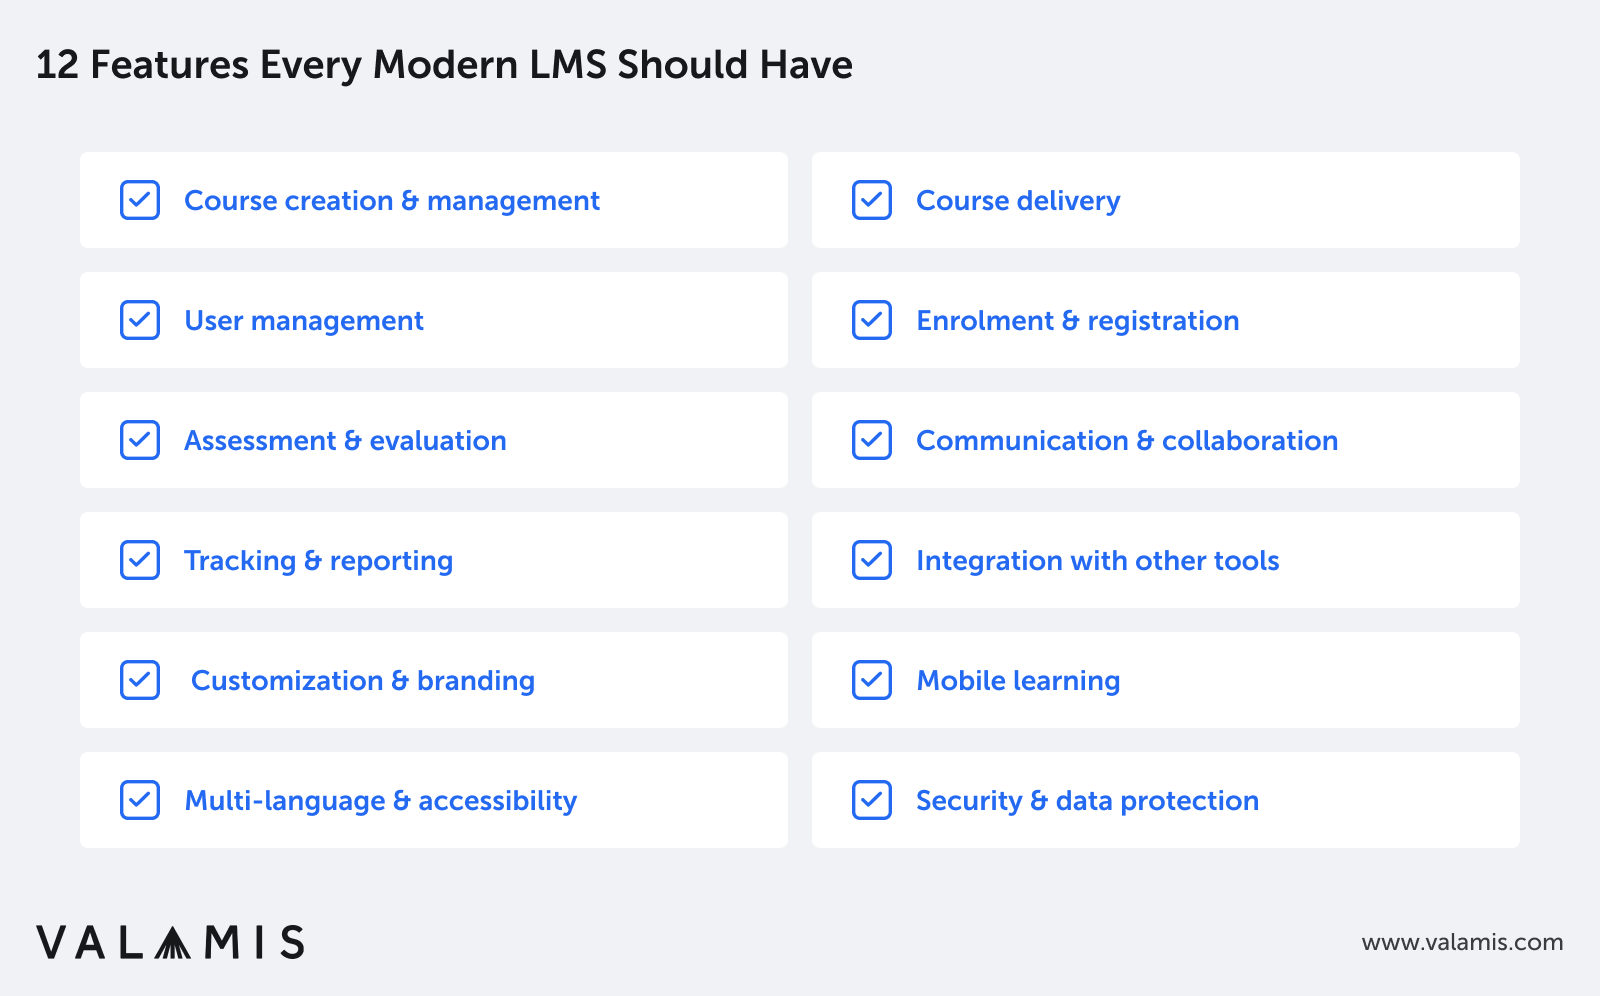 The list of features every LMS should have